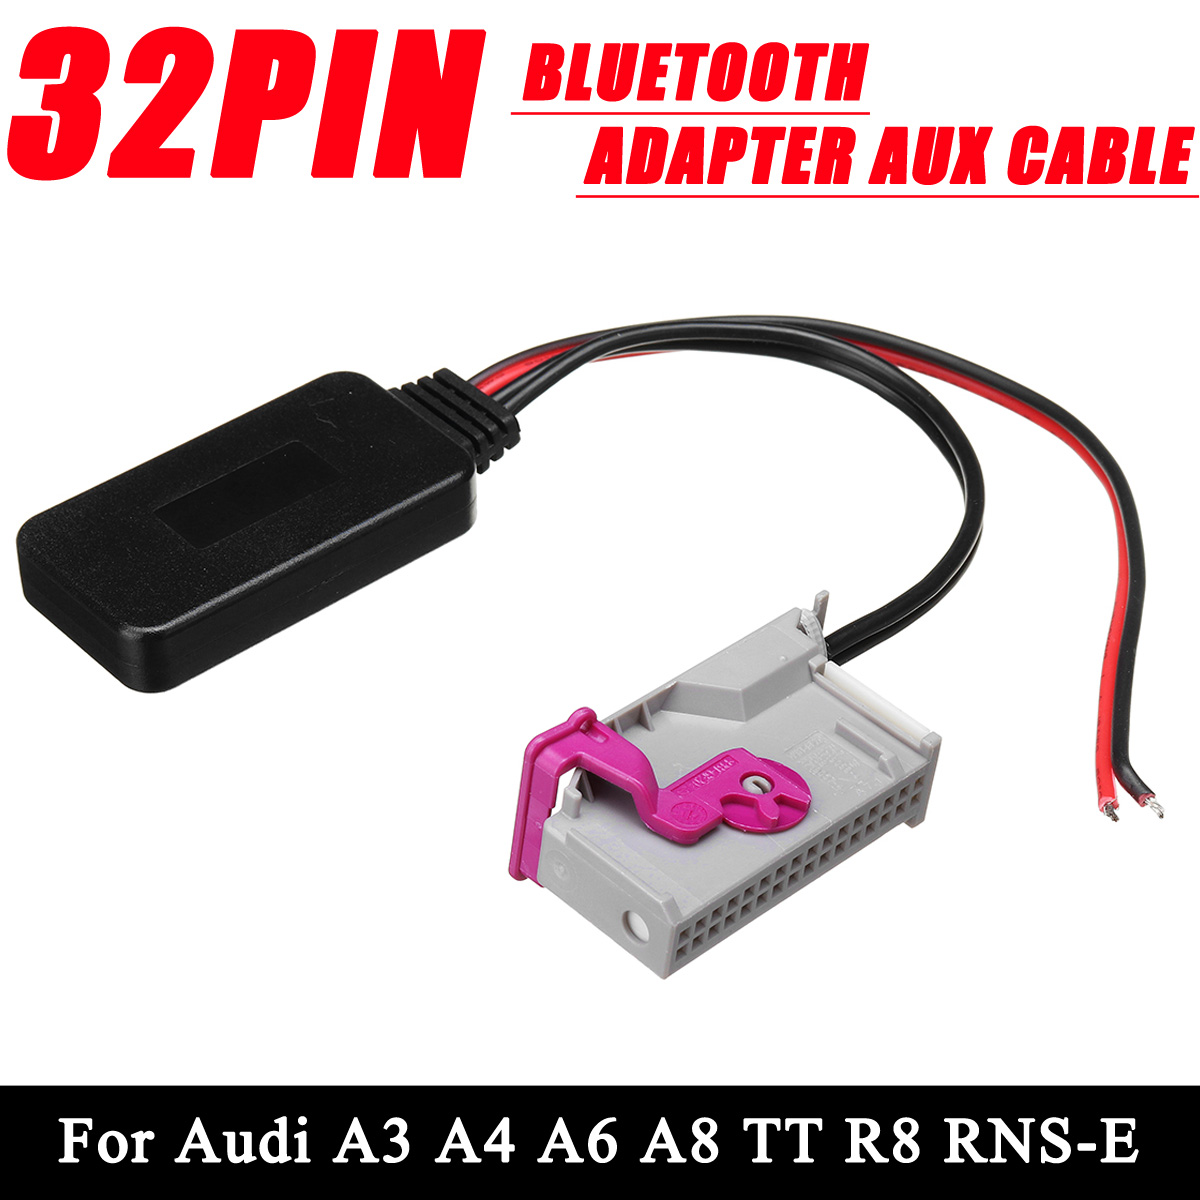 32-pin-bluetooth-Module-Audio-Aux-Cable-Adapter-For-Audi-A3-A4-A6-A8-TT-R8-RNS-E-1372322-1